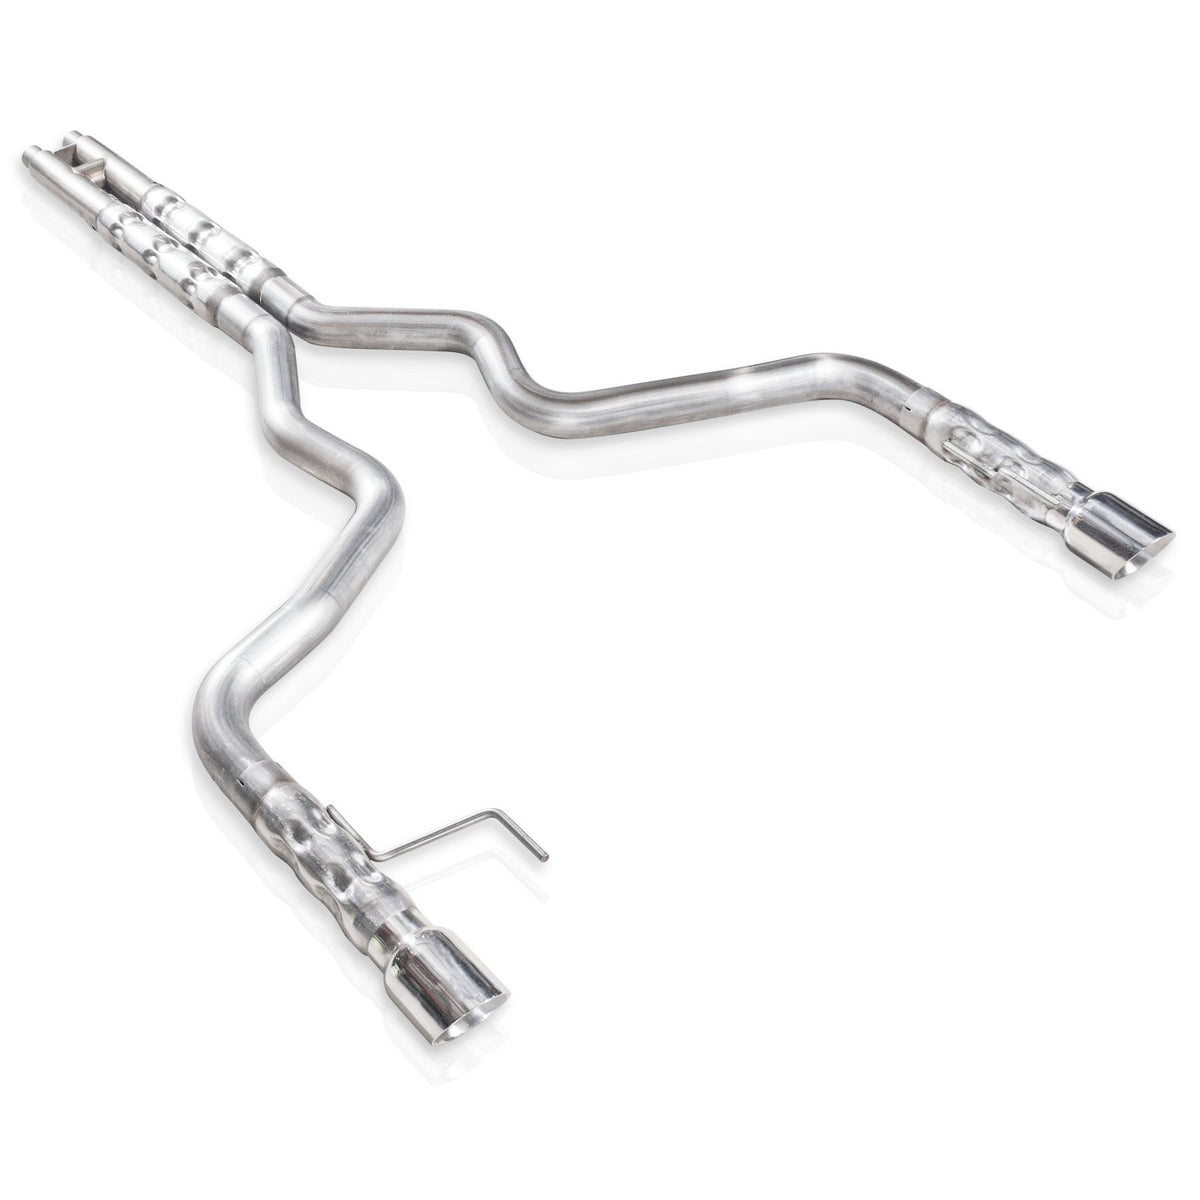 STAINLESS WORKS Mustang GT 5.0L 2015-2017 Cat-Back Exhaust Factory Connect H Pipe w/ 3&quot; Muffler - Stainless (2015-2017 GT 5.0L V